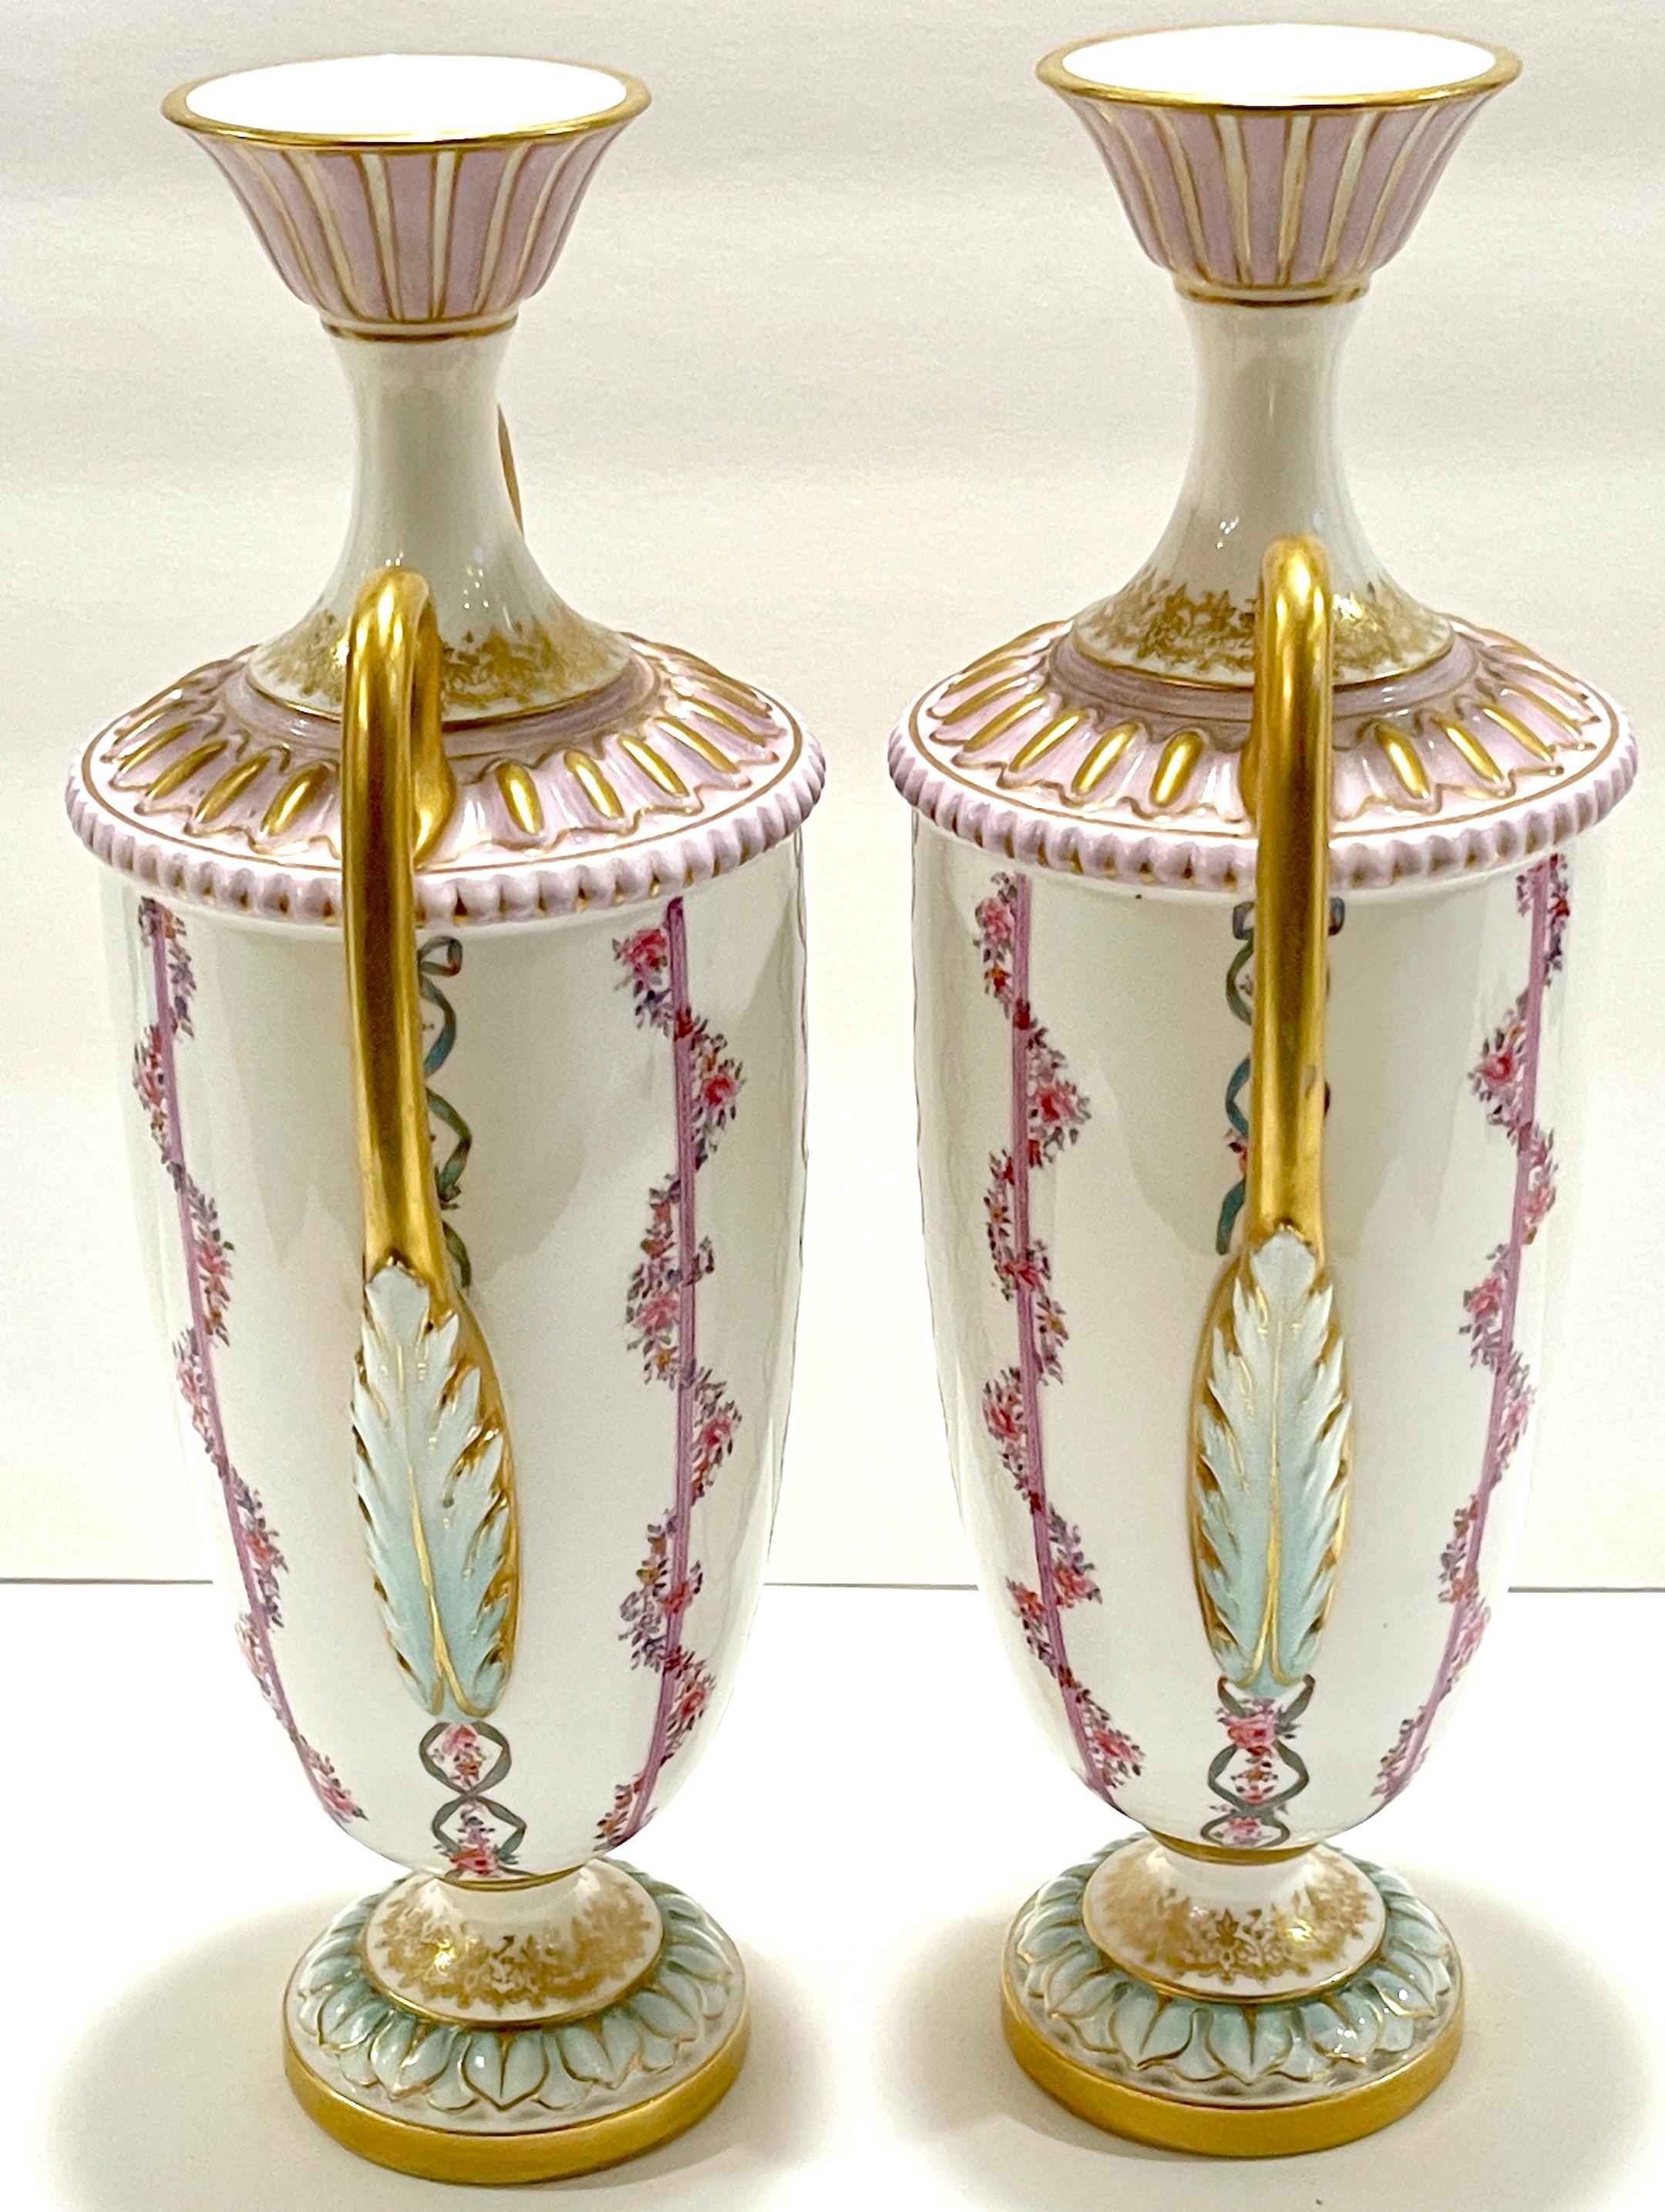 Neoclassical Revival Pair of Royal Worcester Transitional Neoclassical Style Vases, England, 1901 For Sale